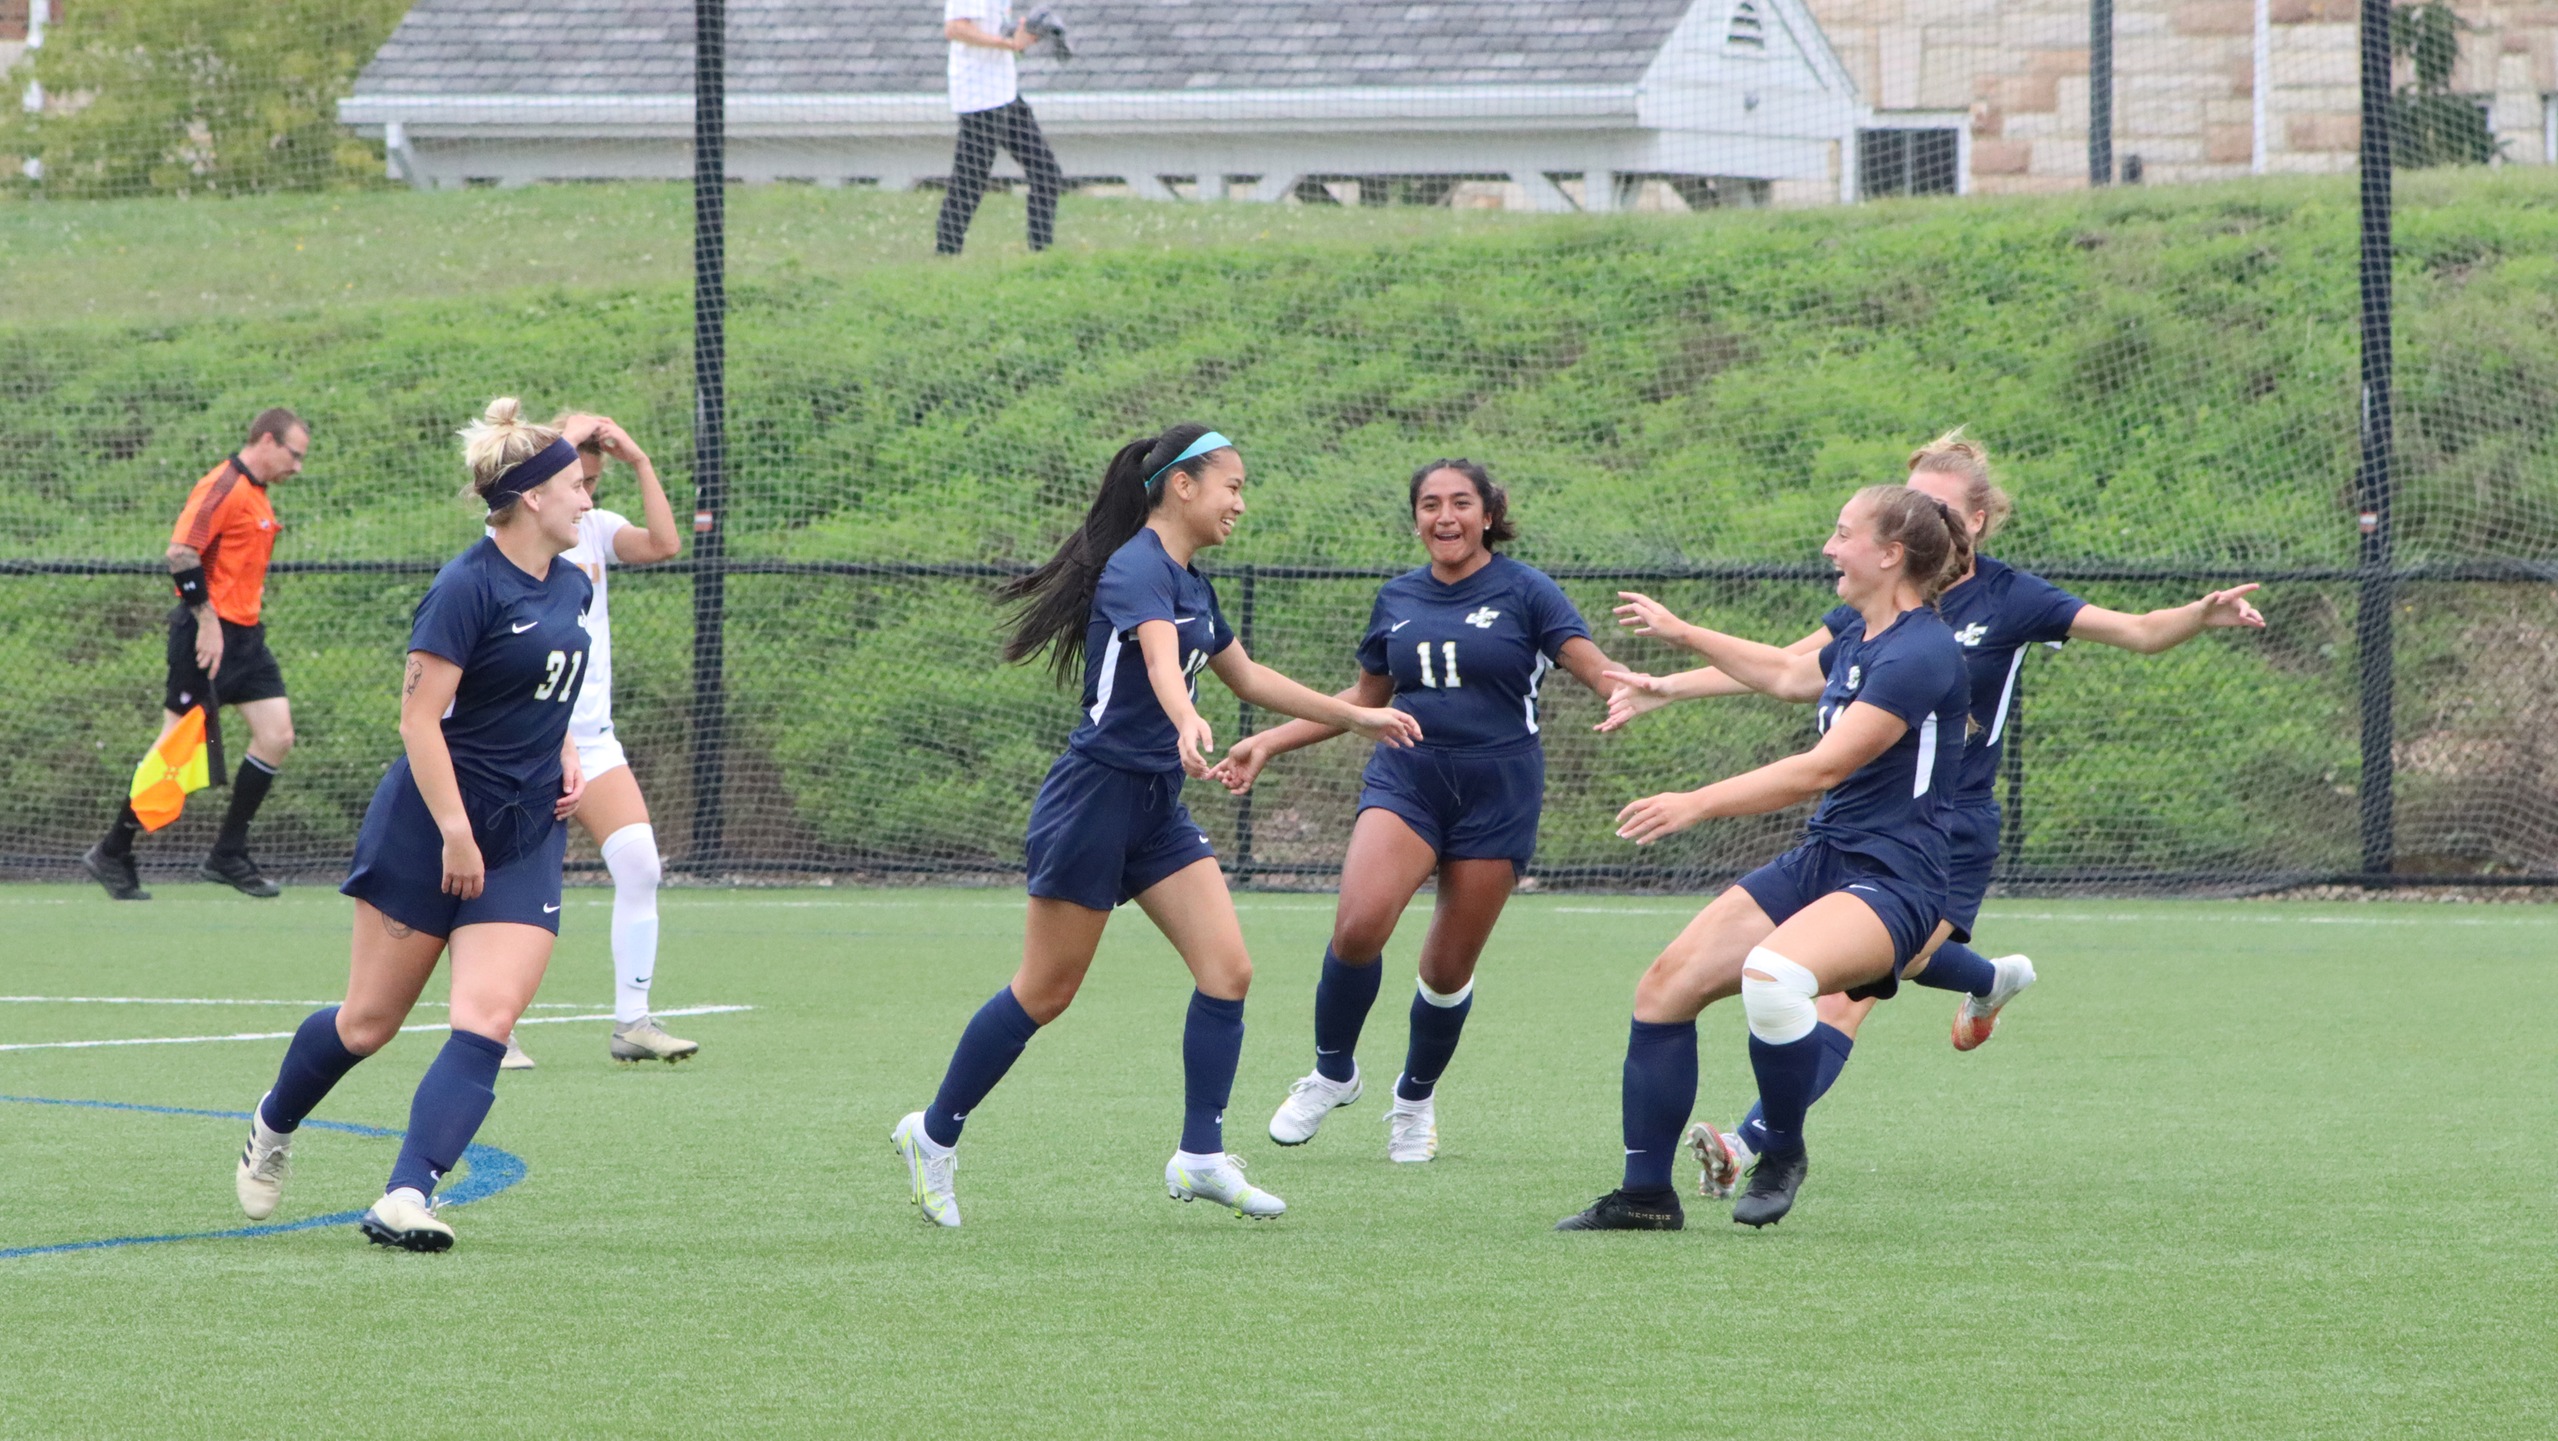 Early Goal by Bui Secures Women's Soccer First Dub of the Season